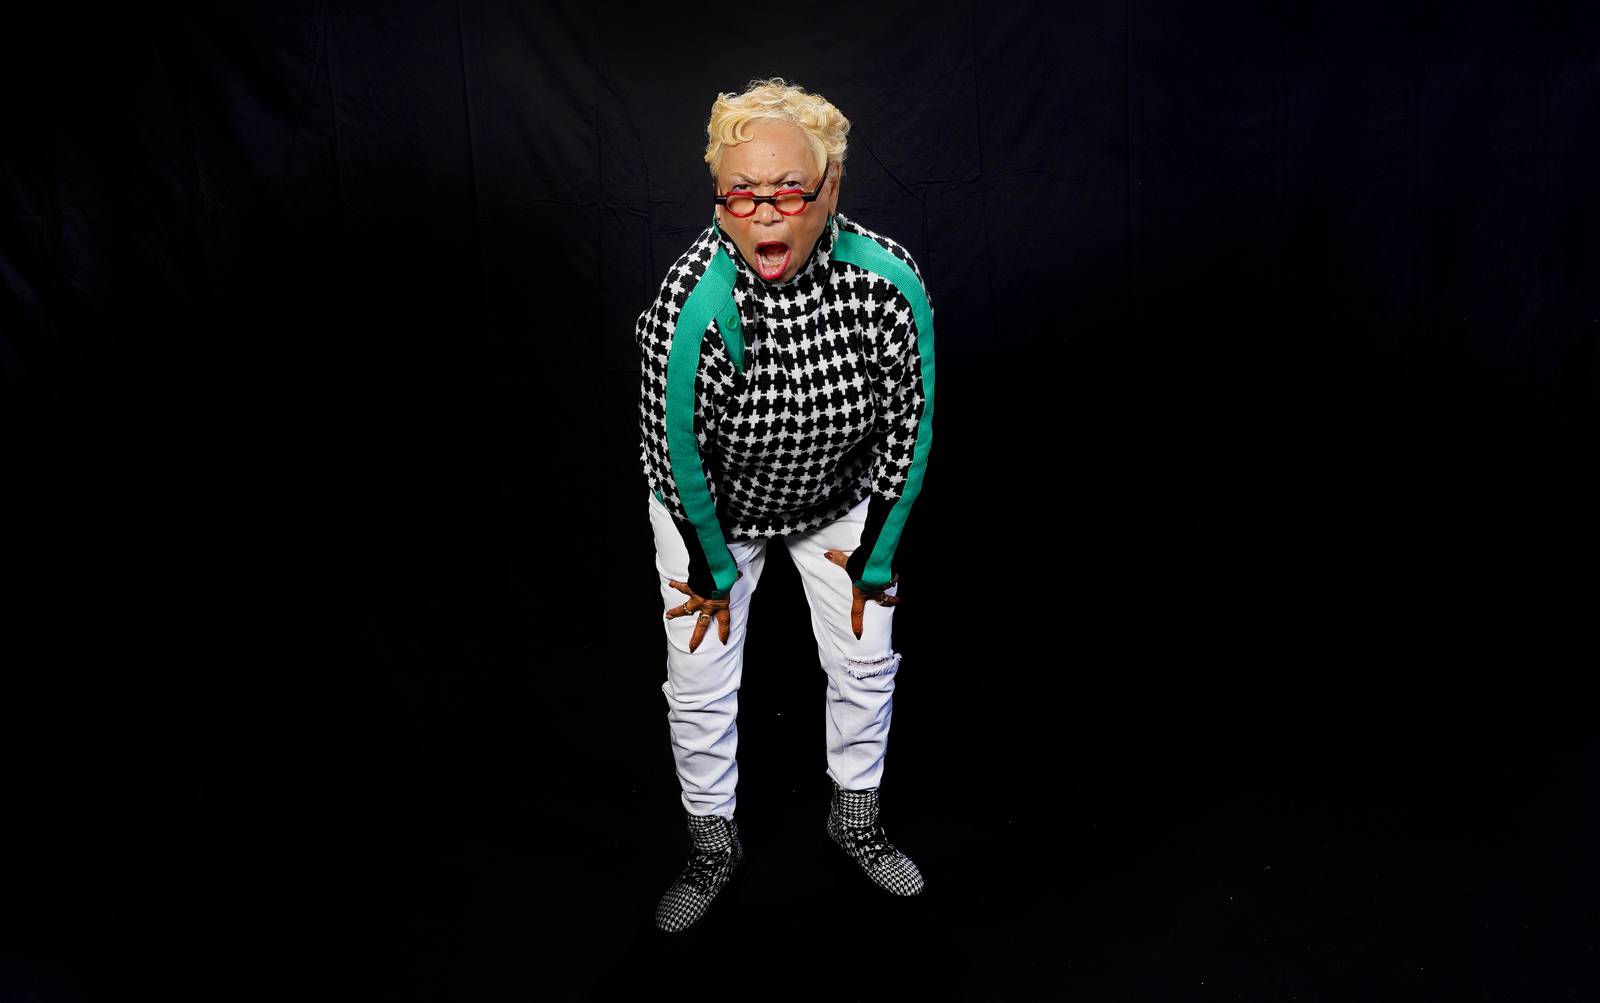 Carolyn Lloyd at the Banner Photo Booth for CIAA fans struts her stuff.